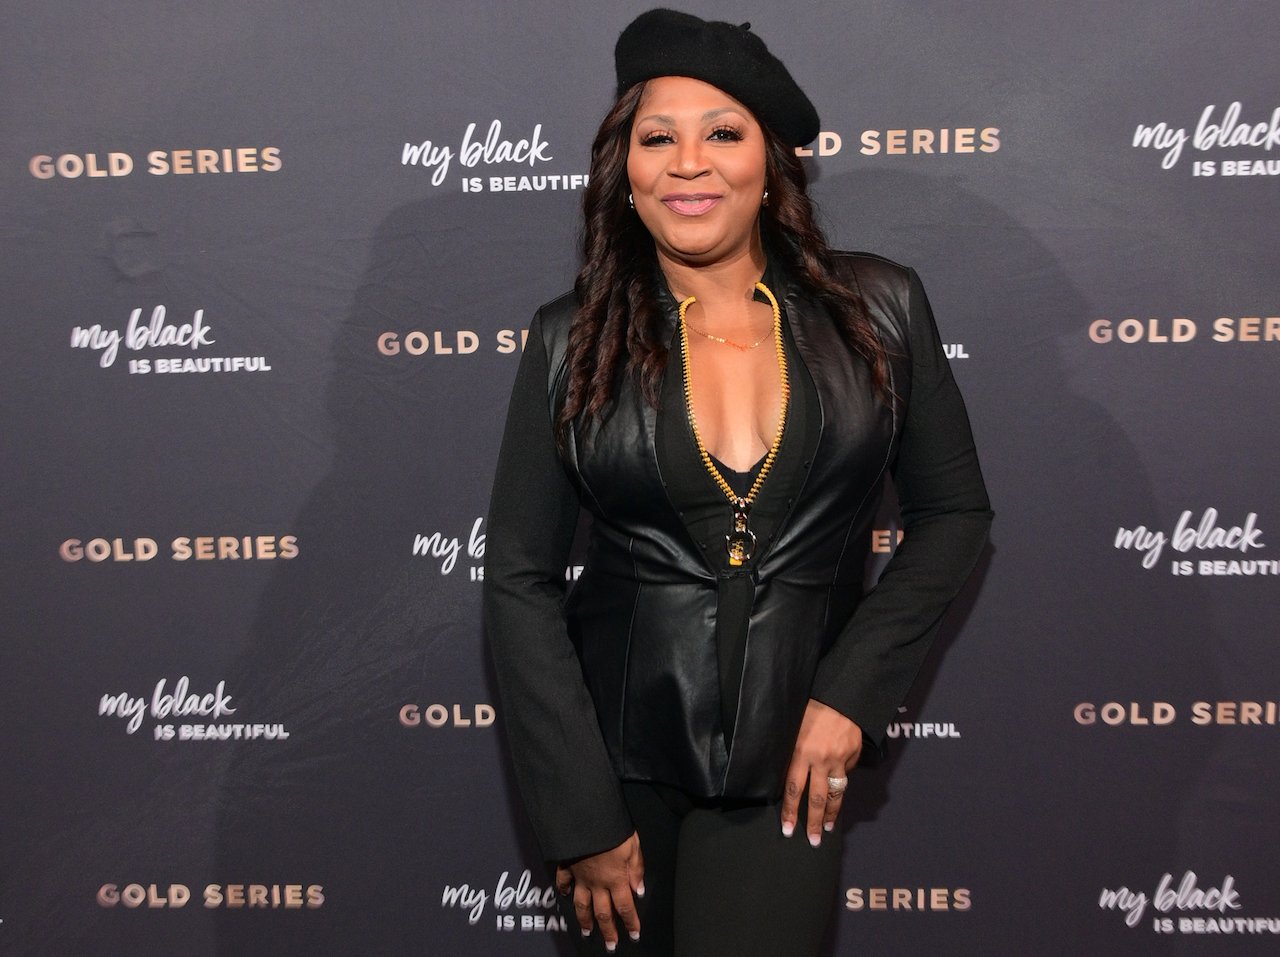 Trina Braxton smiles and poses on the red carpet; Braxton recently filed a police report